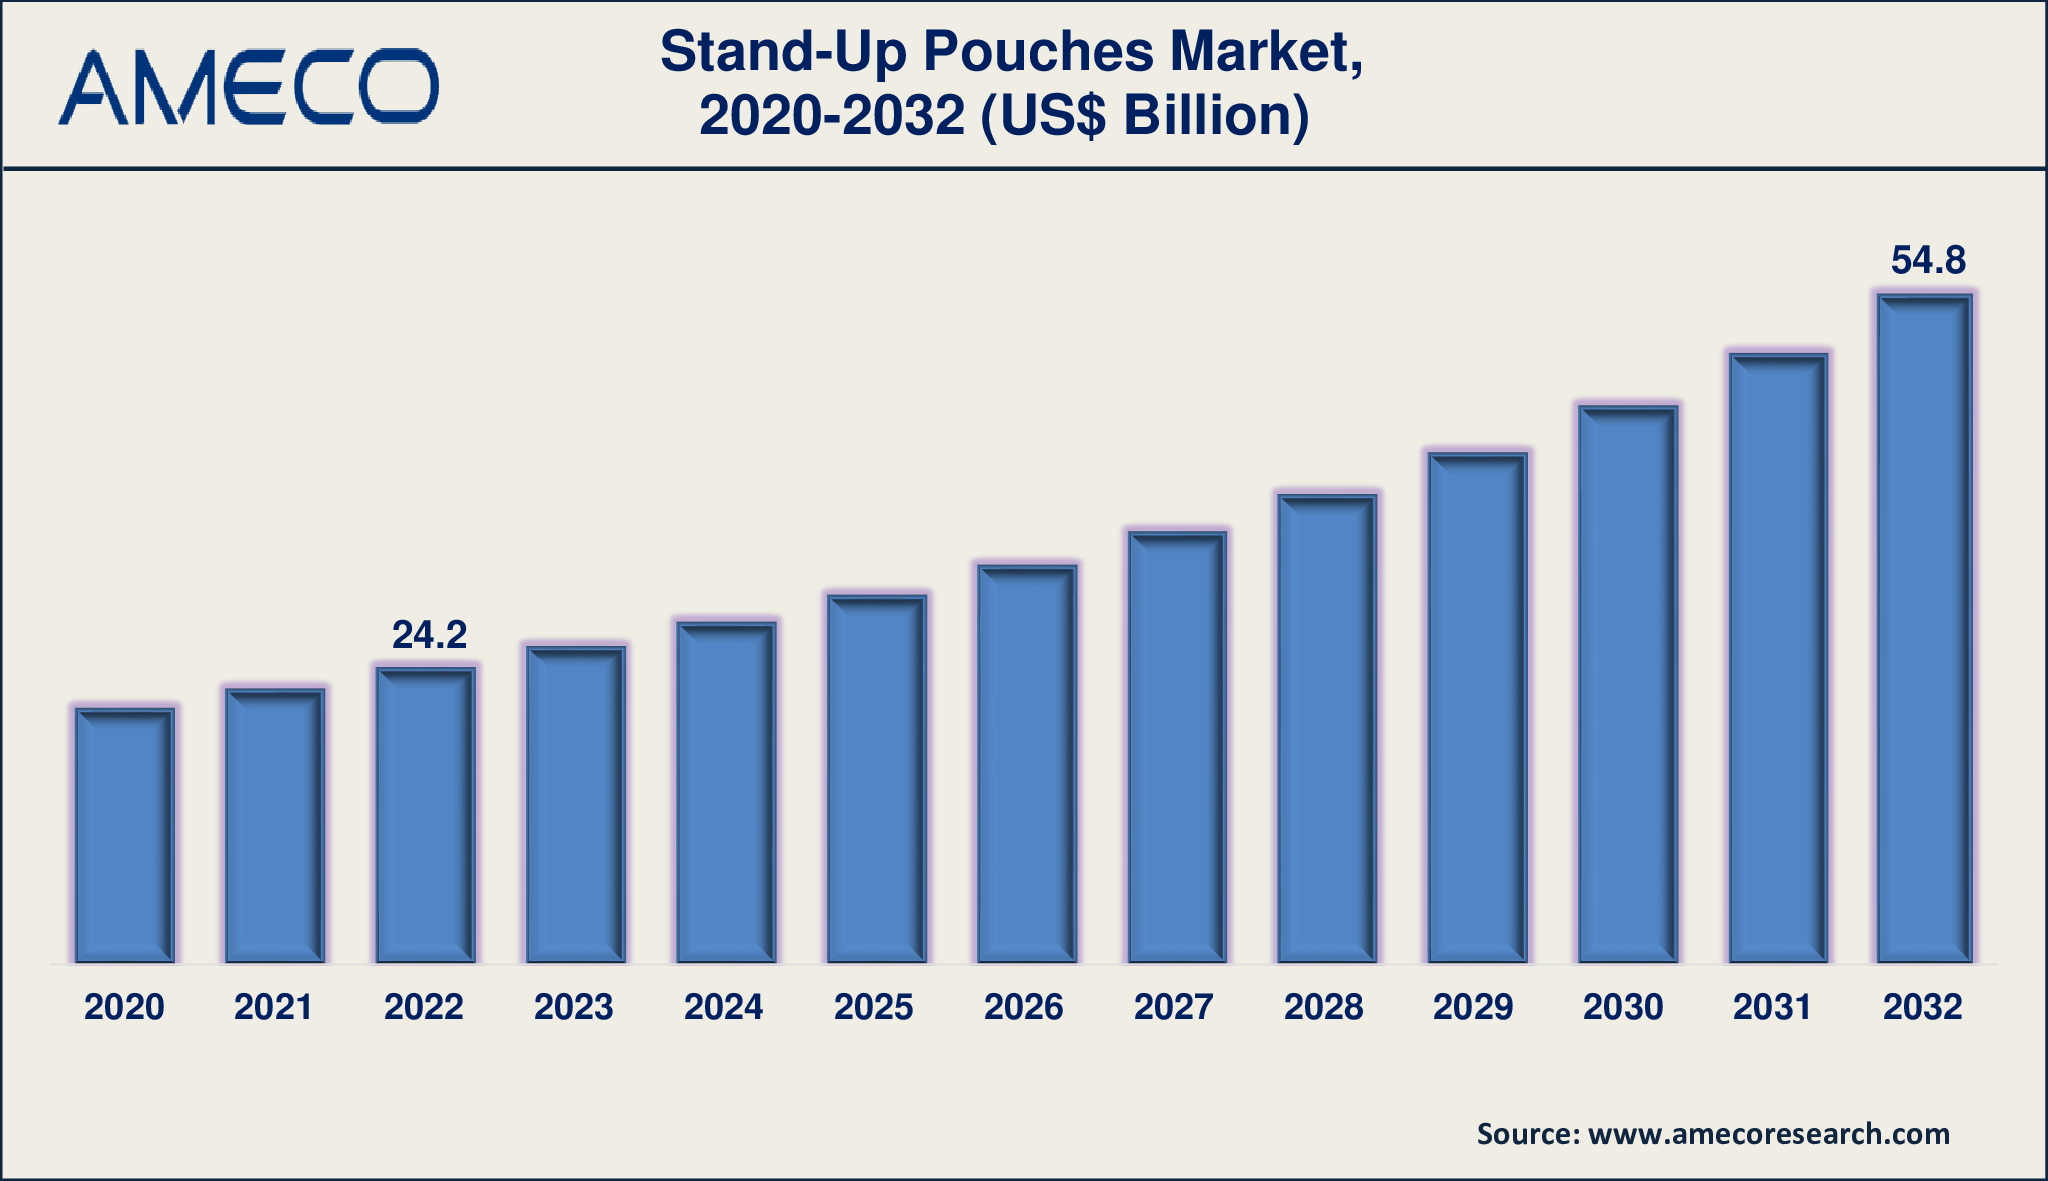 Stand-Up Pouches Market Dynamics